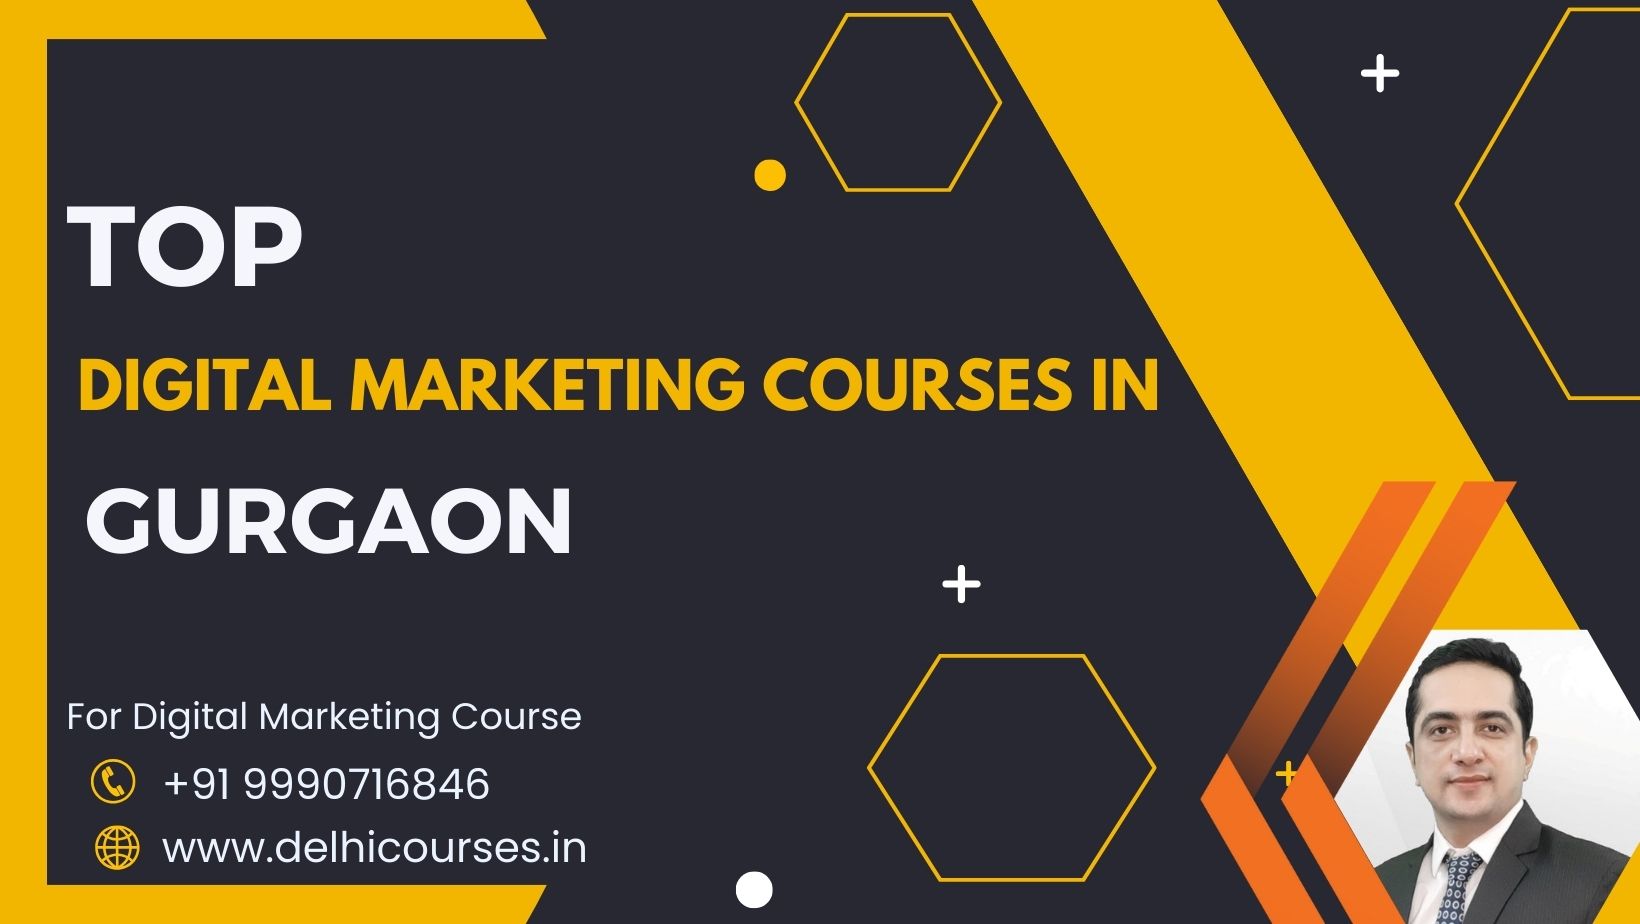 Top 10 Best Digital Marketing Courses in Gurgaon With Job Placements & Fees